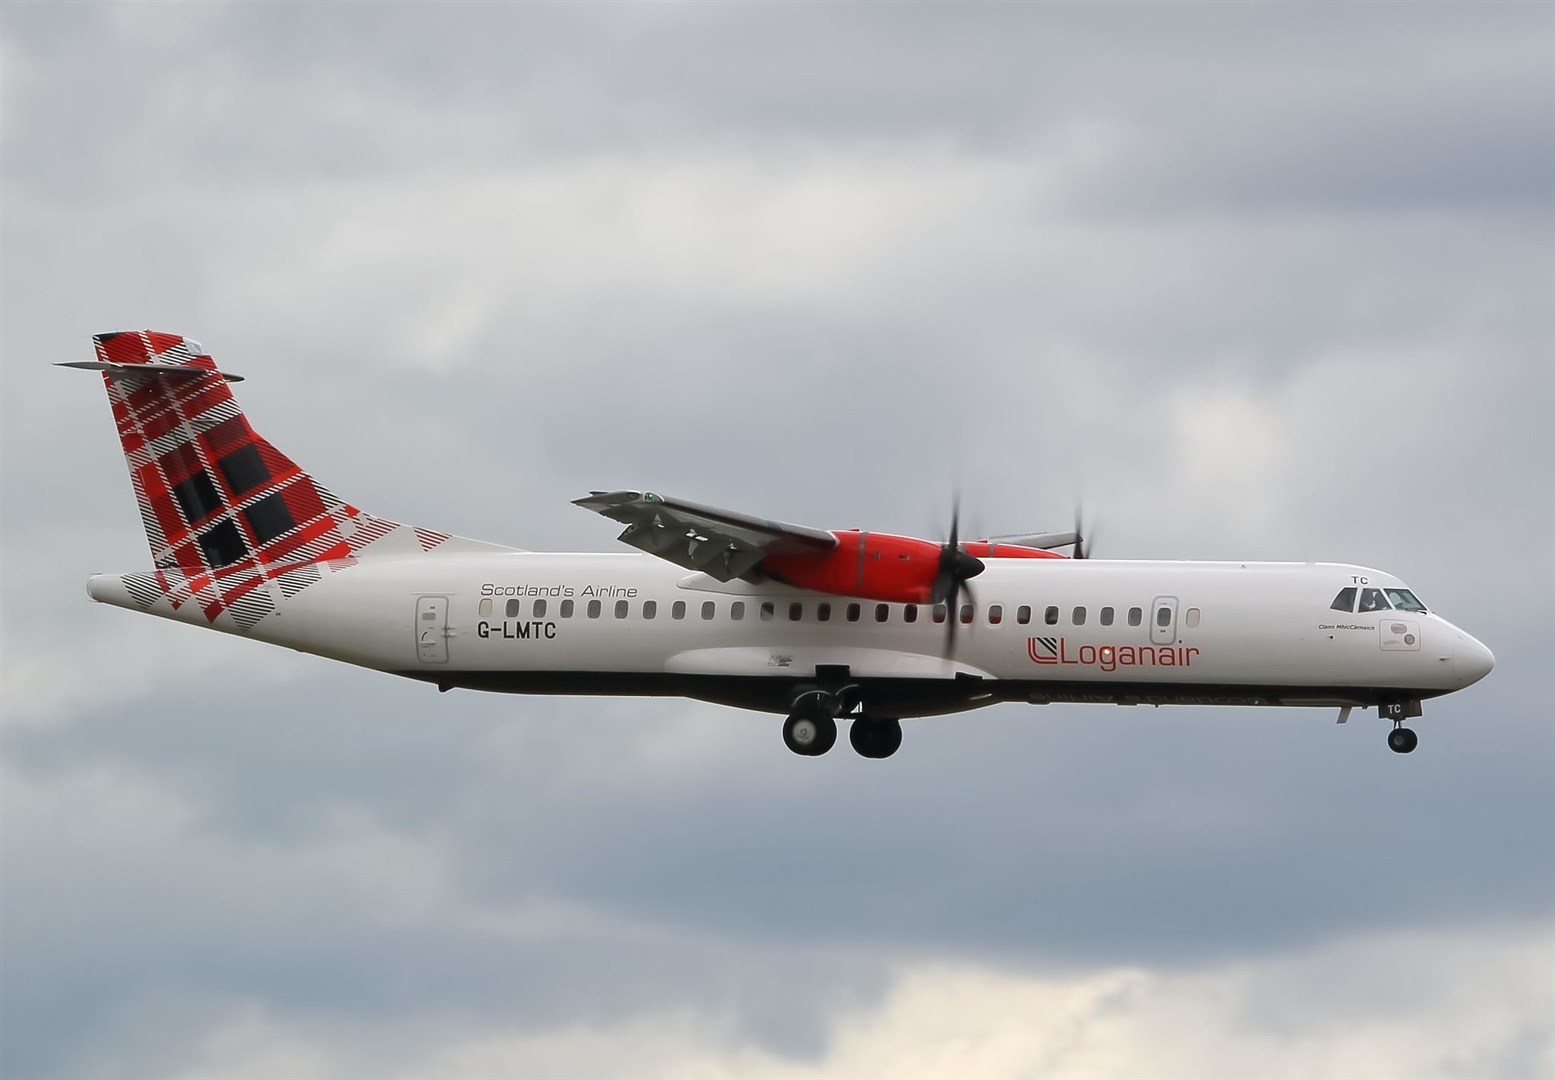 The Loganair flight from Inverness to Manchester was delayed this morning.